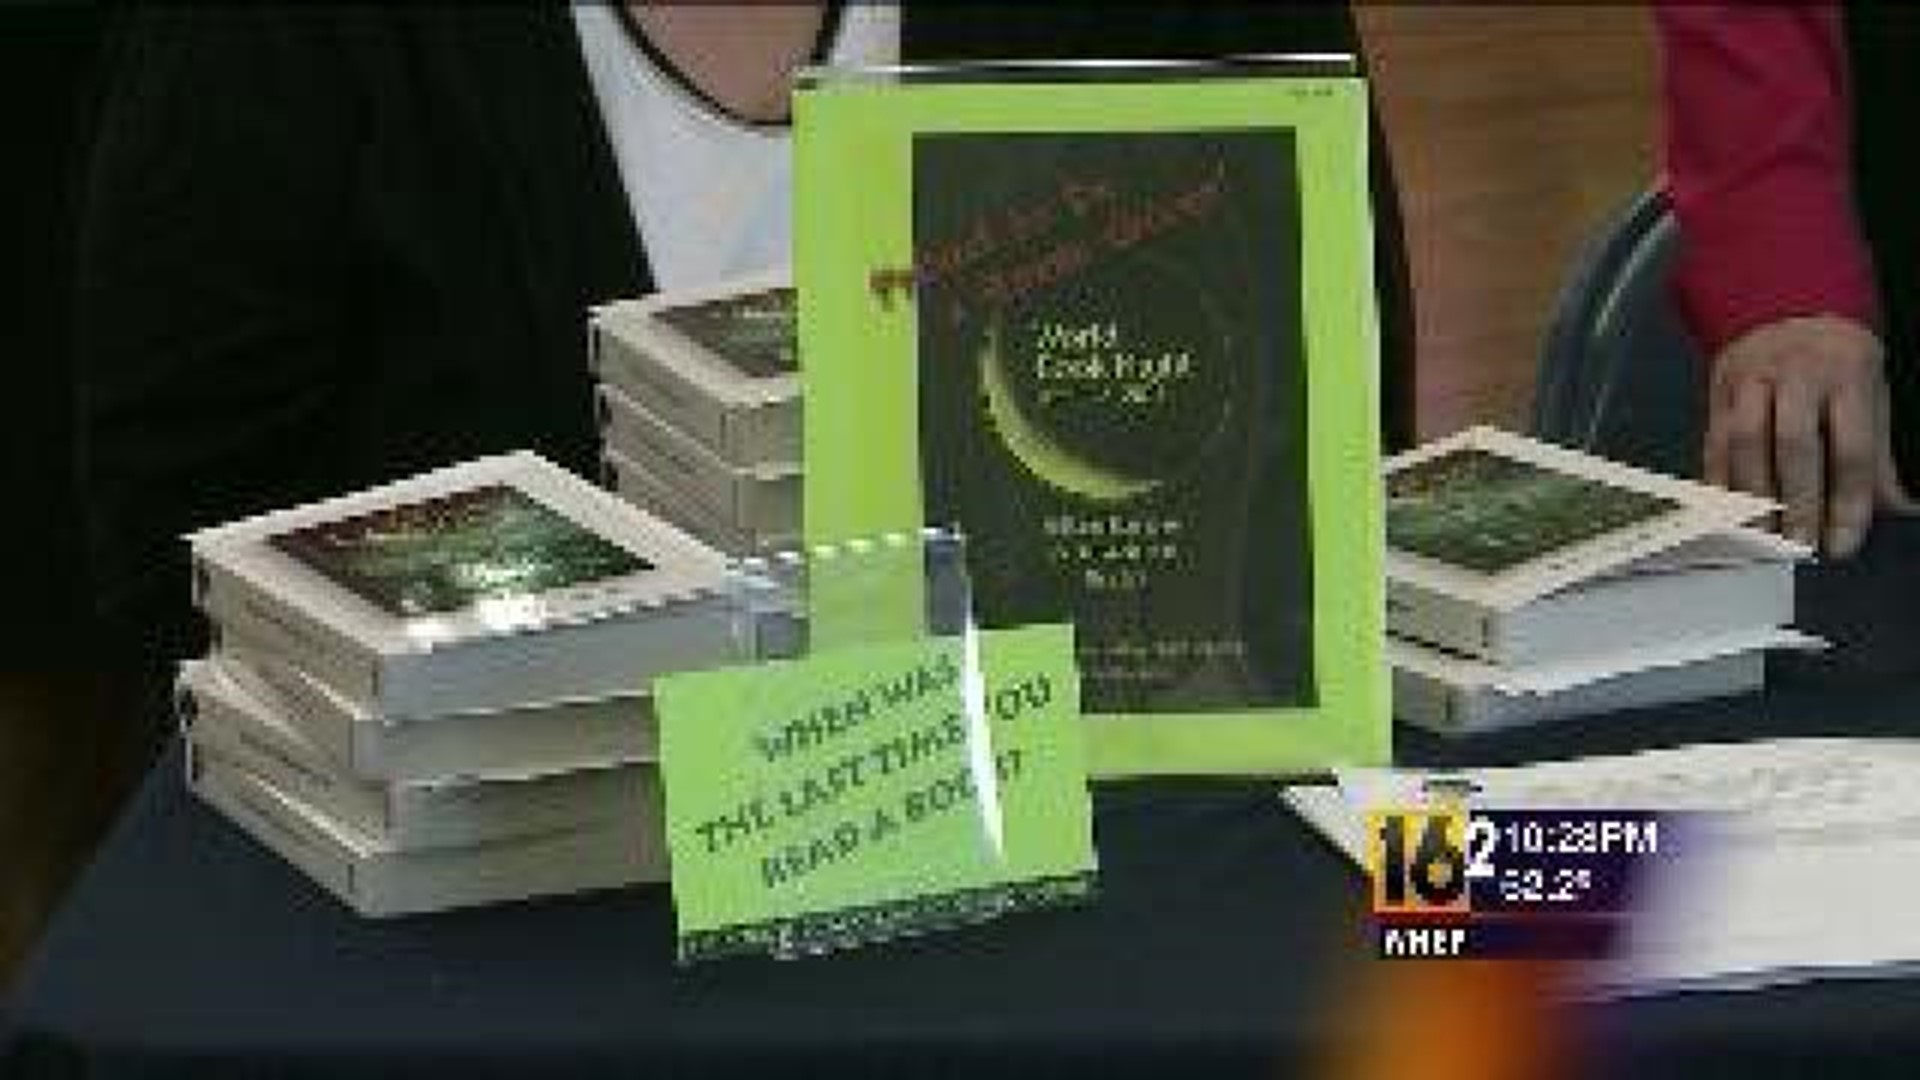 Book Giveaway Honors Shakespeare